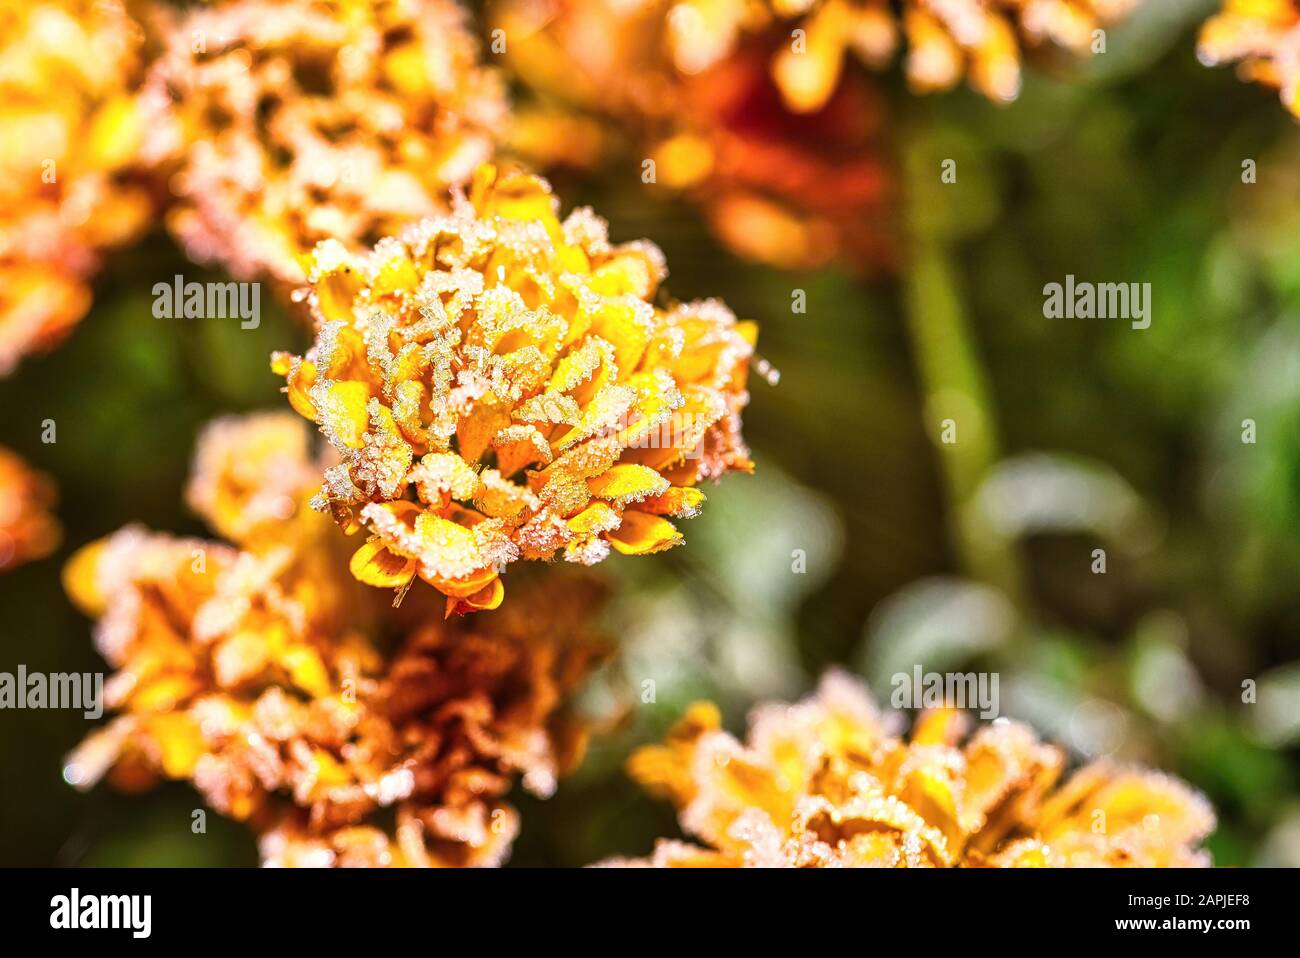 Horizontal photo with detail of vibrant orange bloom which is fully covered by frost. Ice is visible on flower. Other blooms are in background. Stock Photo